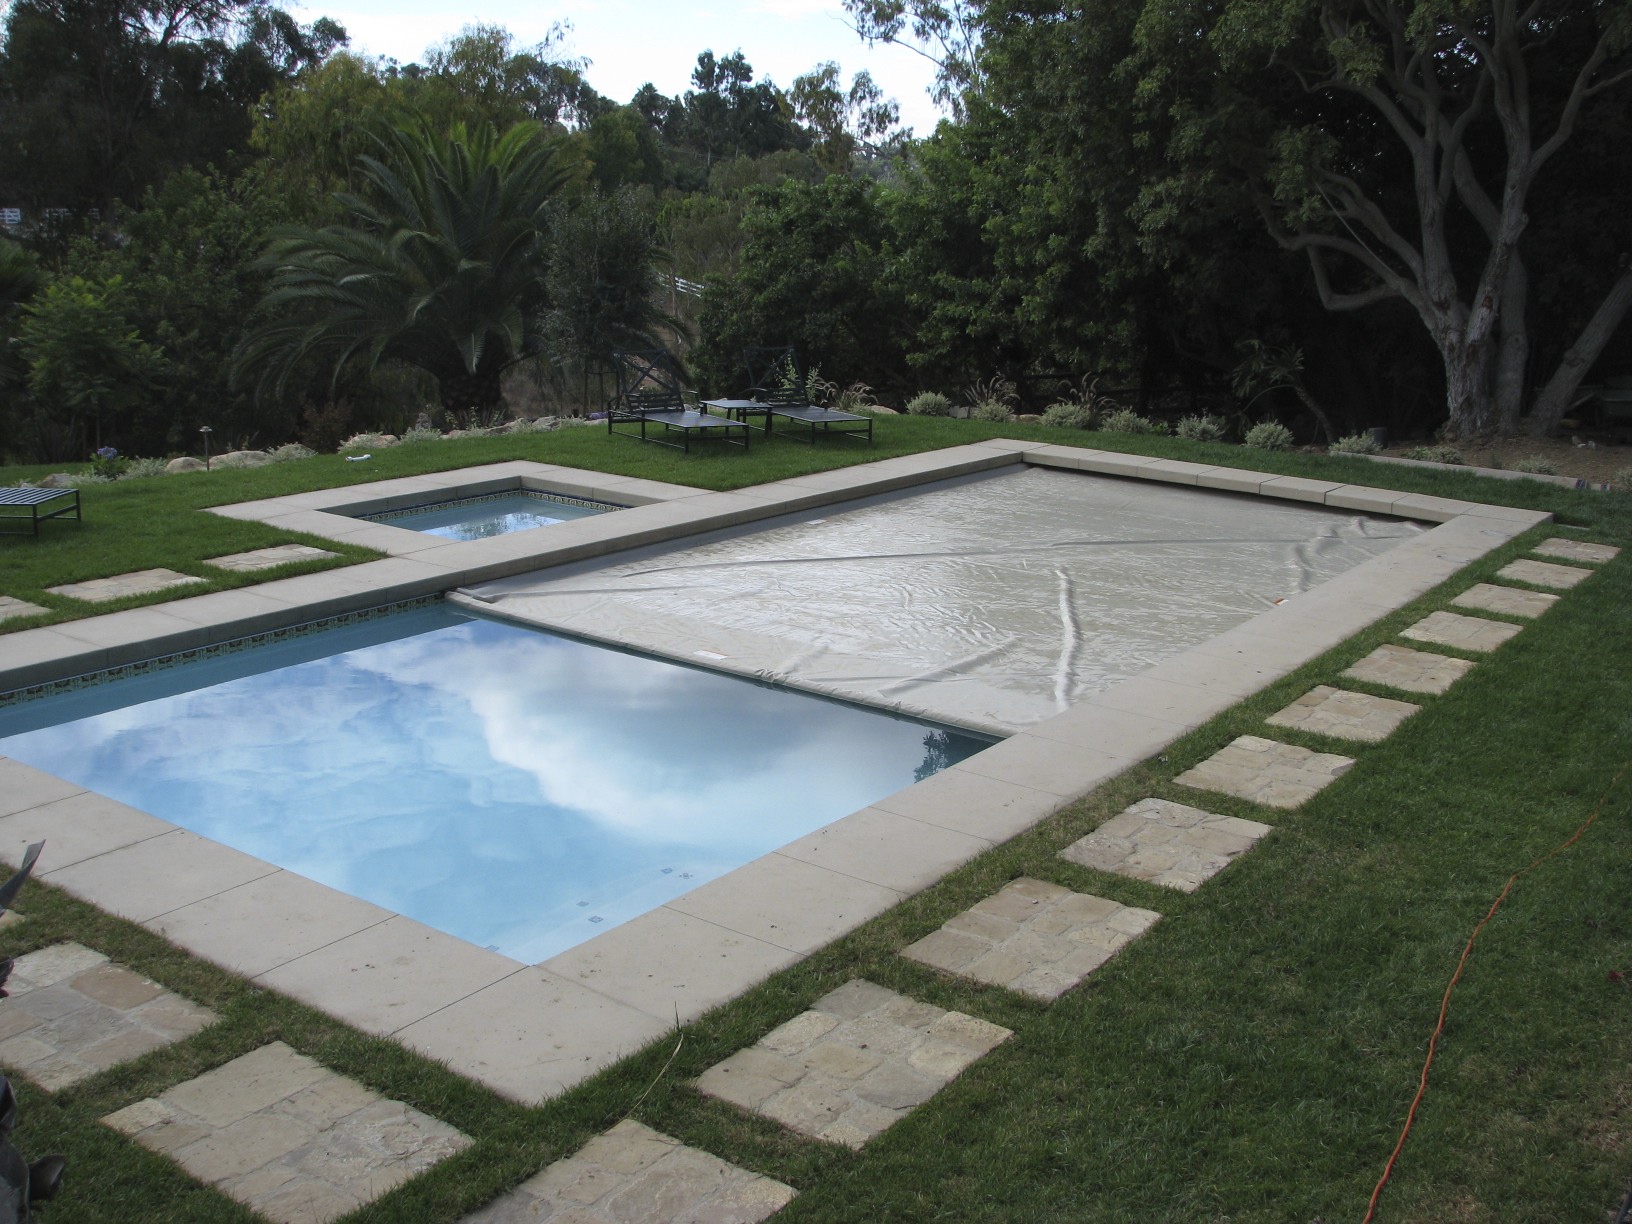 automatic pool covers